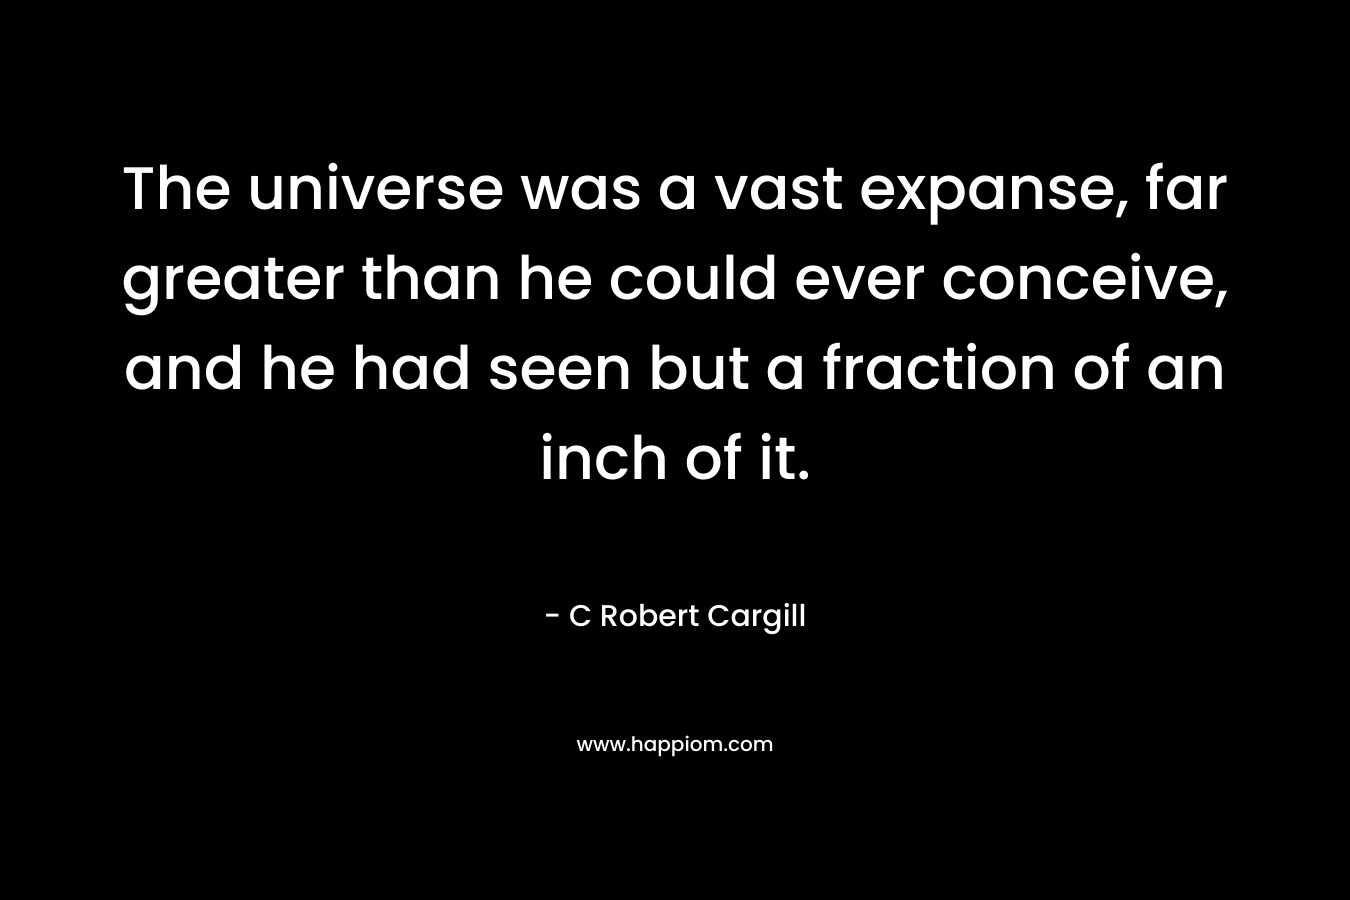 The universe was a vast expanse, far greater than he could ever conceive, and he had seen but a fraction of an inch of it.